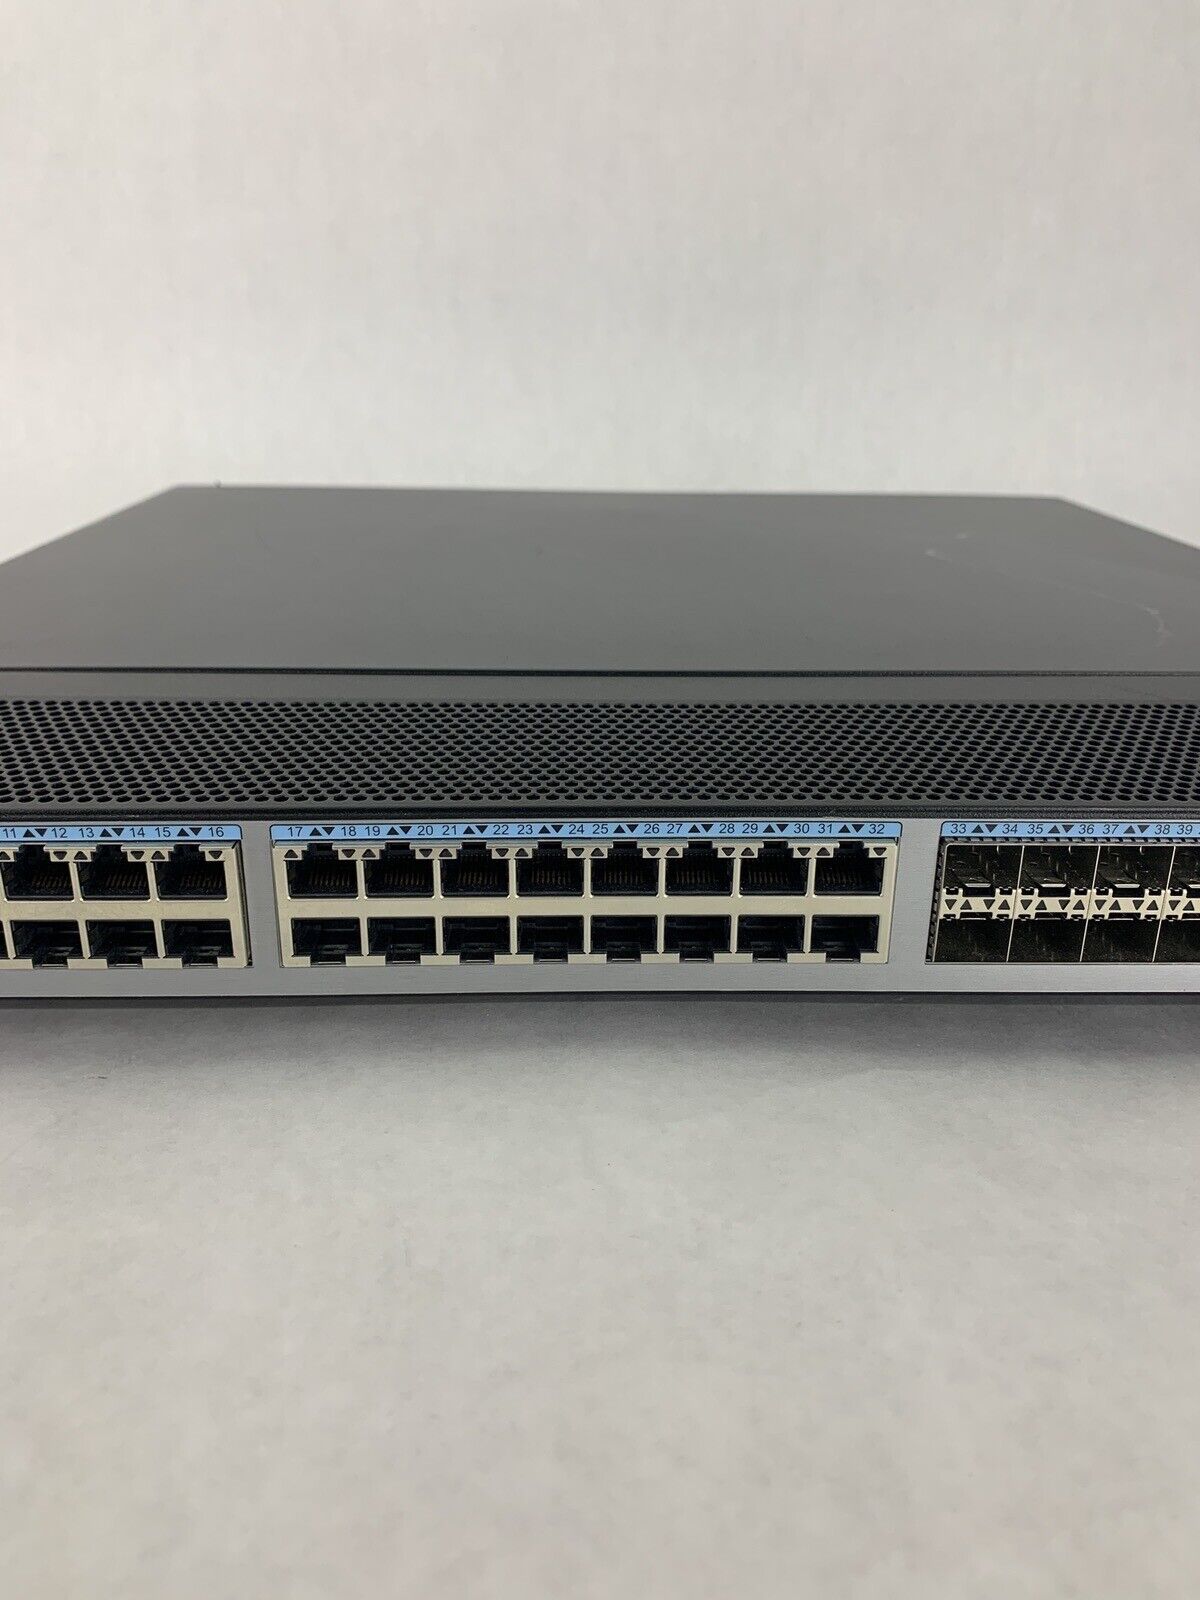 Huawei CE6810-32T16S4Q-LI Cloud Engine 6800 Ethernet Network Managed Switch